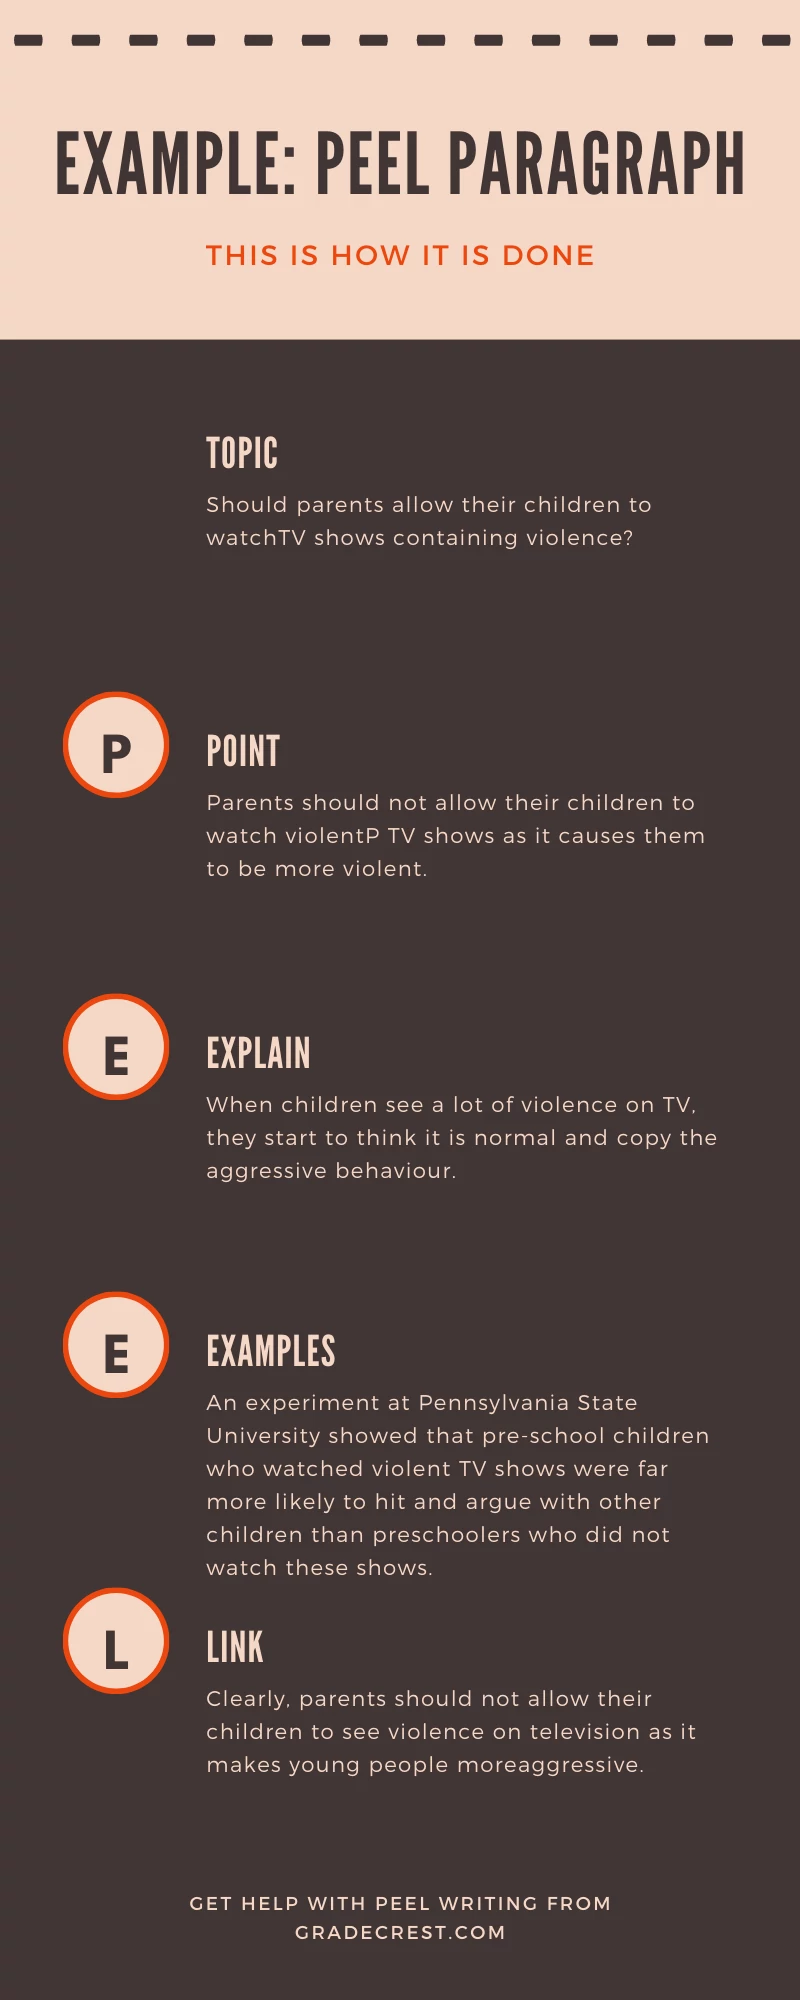 PEEL Paragraph format example, in infographic representation.